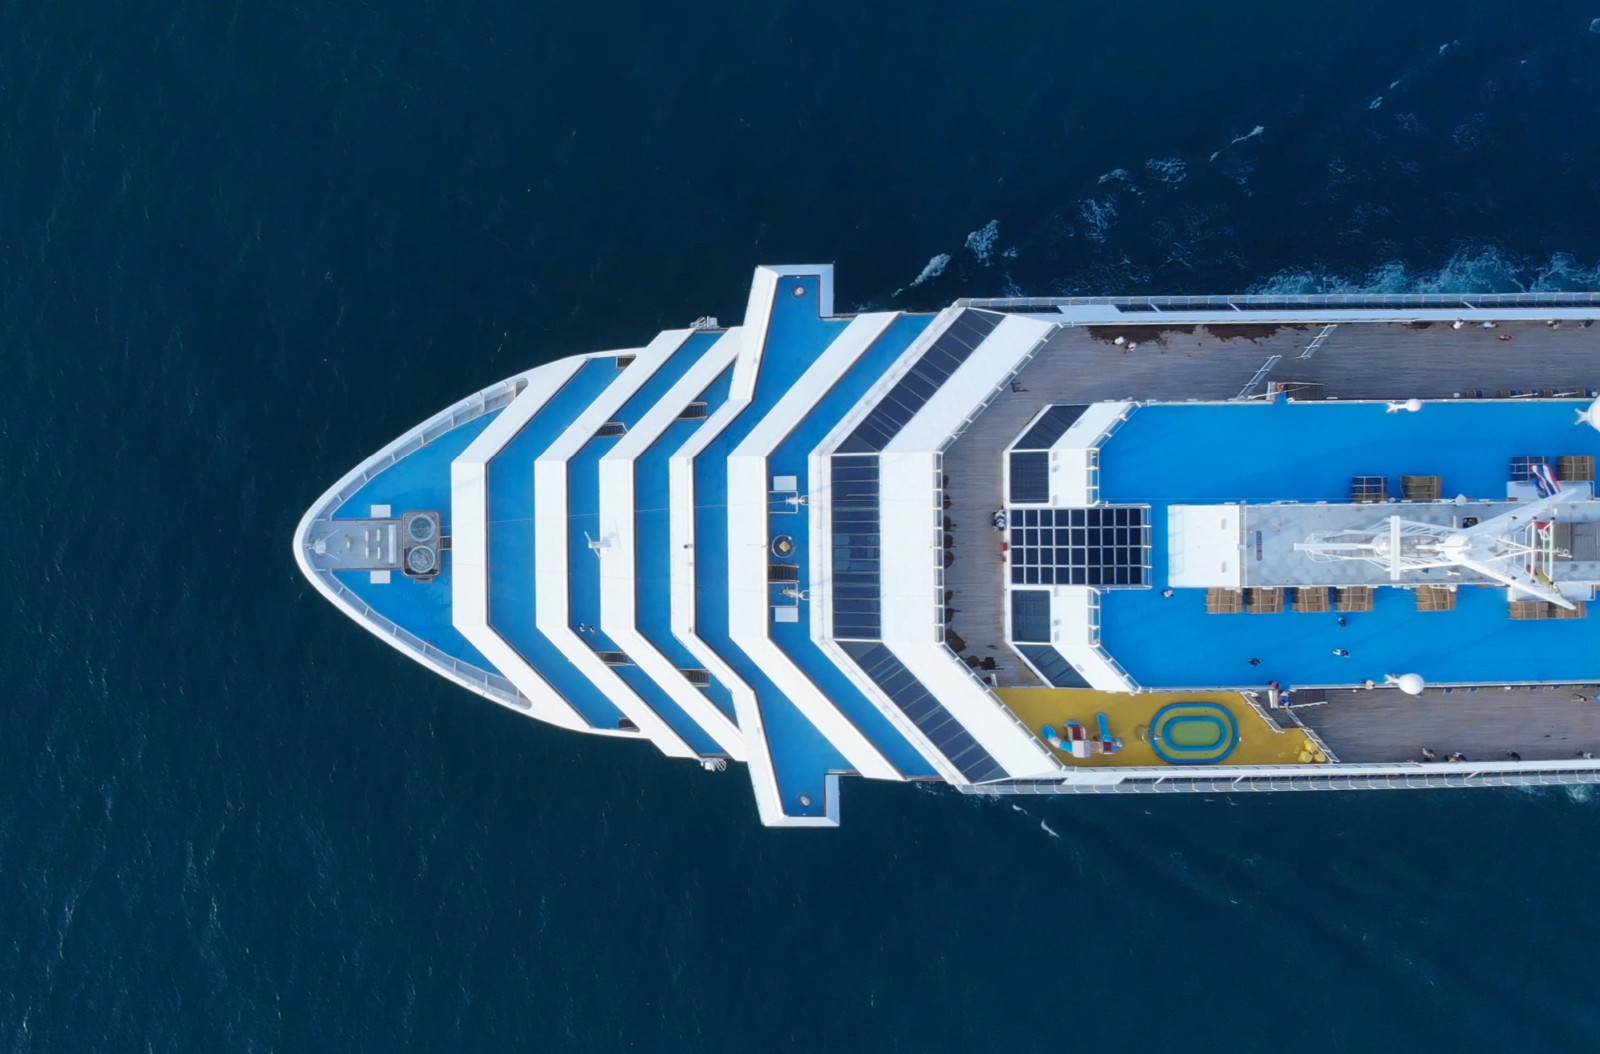 Cruise Ship from above